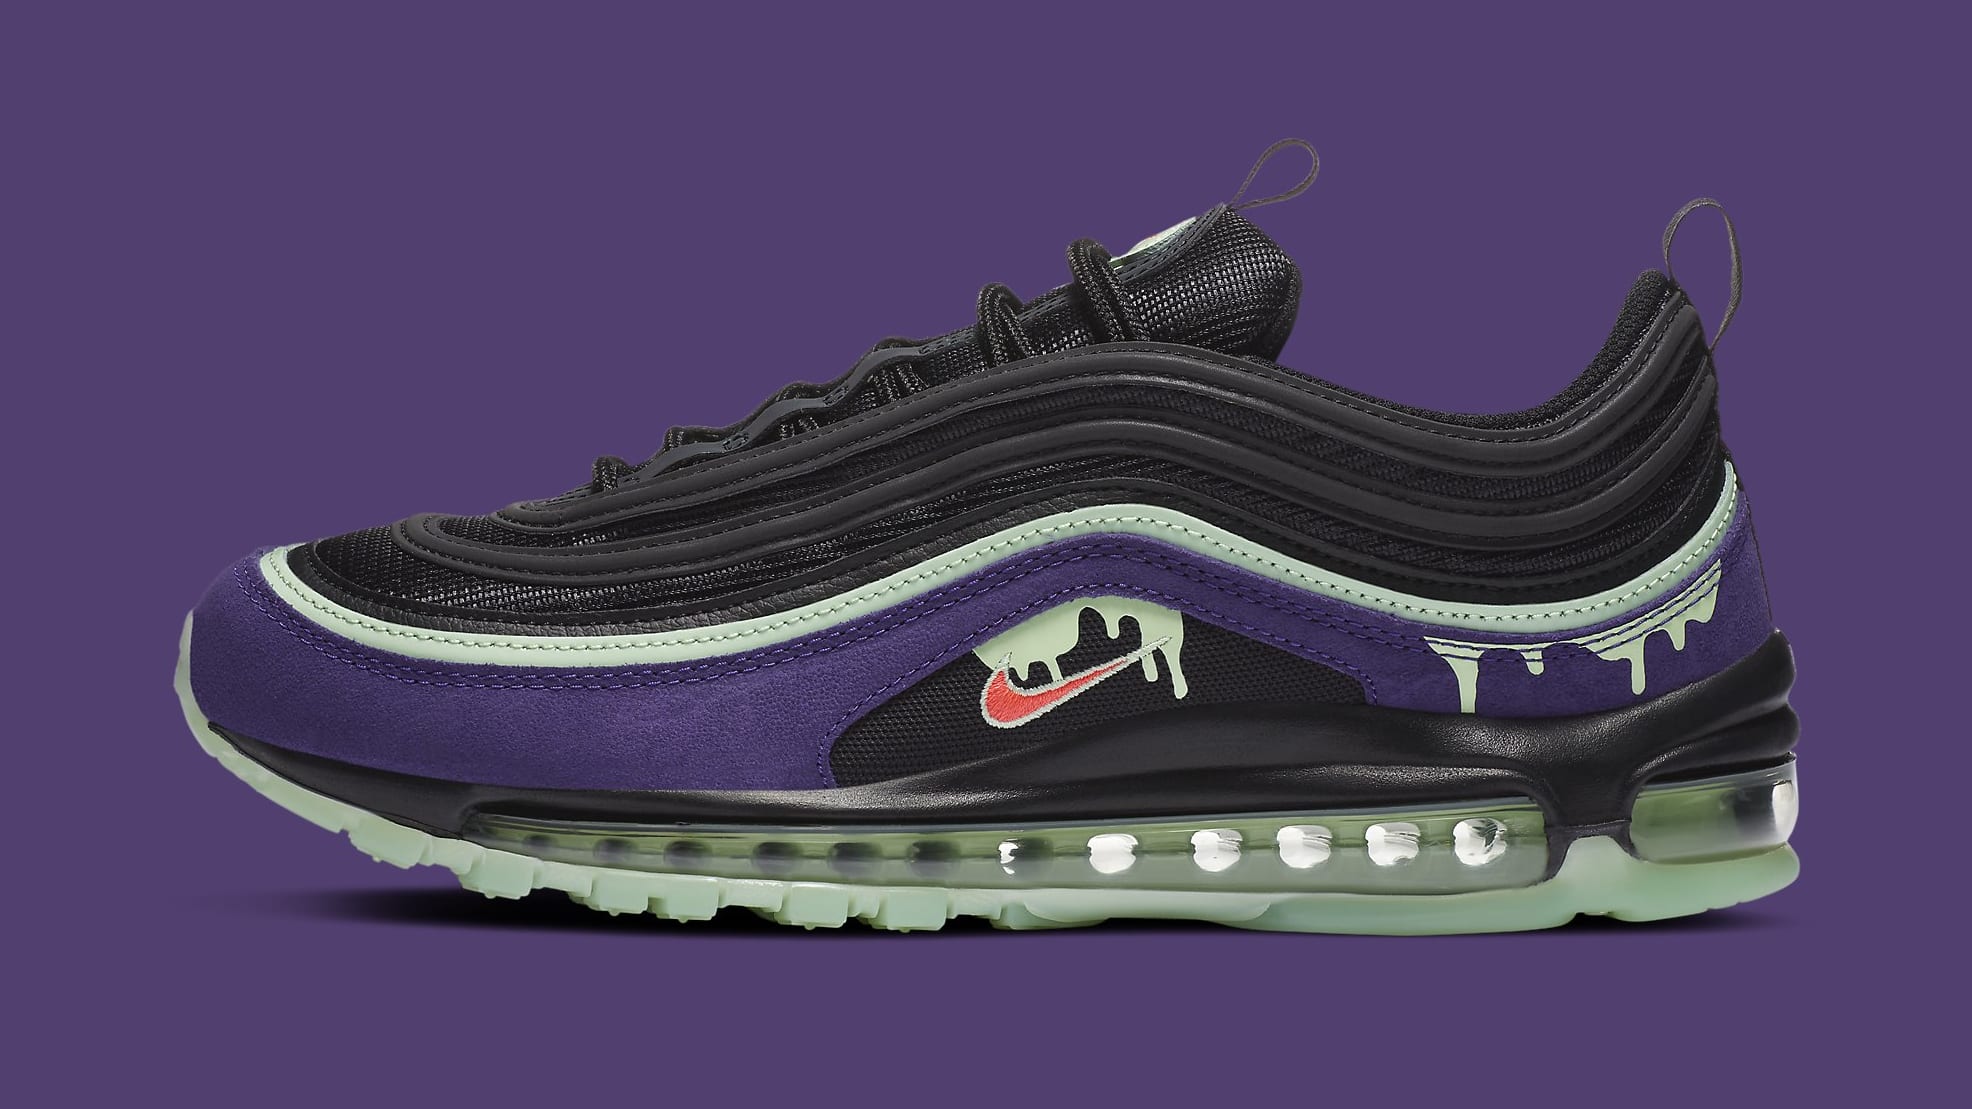 Nike Air Max 97 'Halloween' Release Date DC1500-001 | Sole Collector